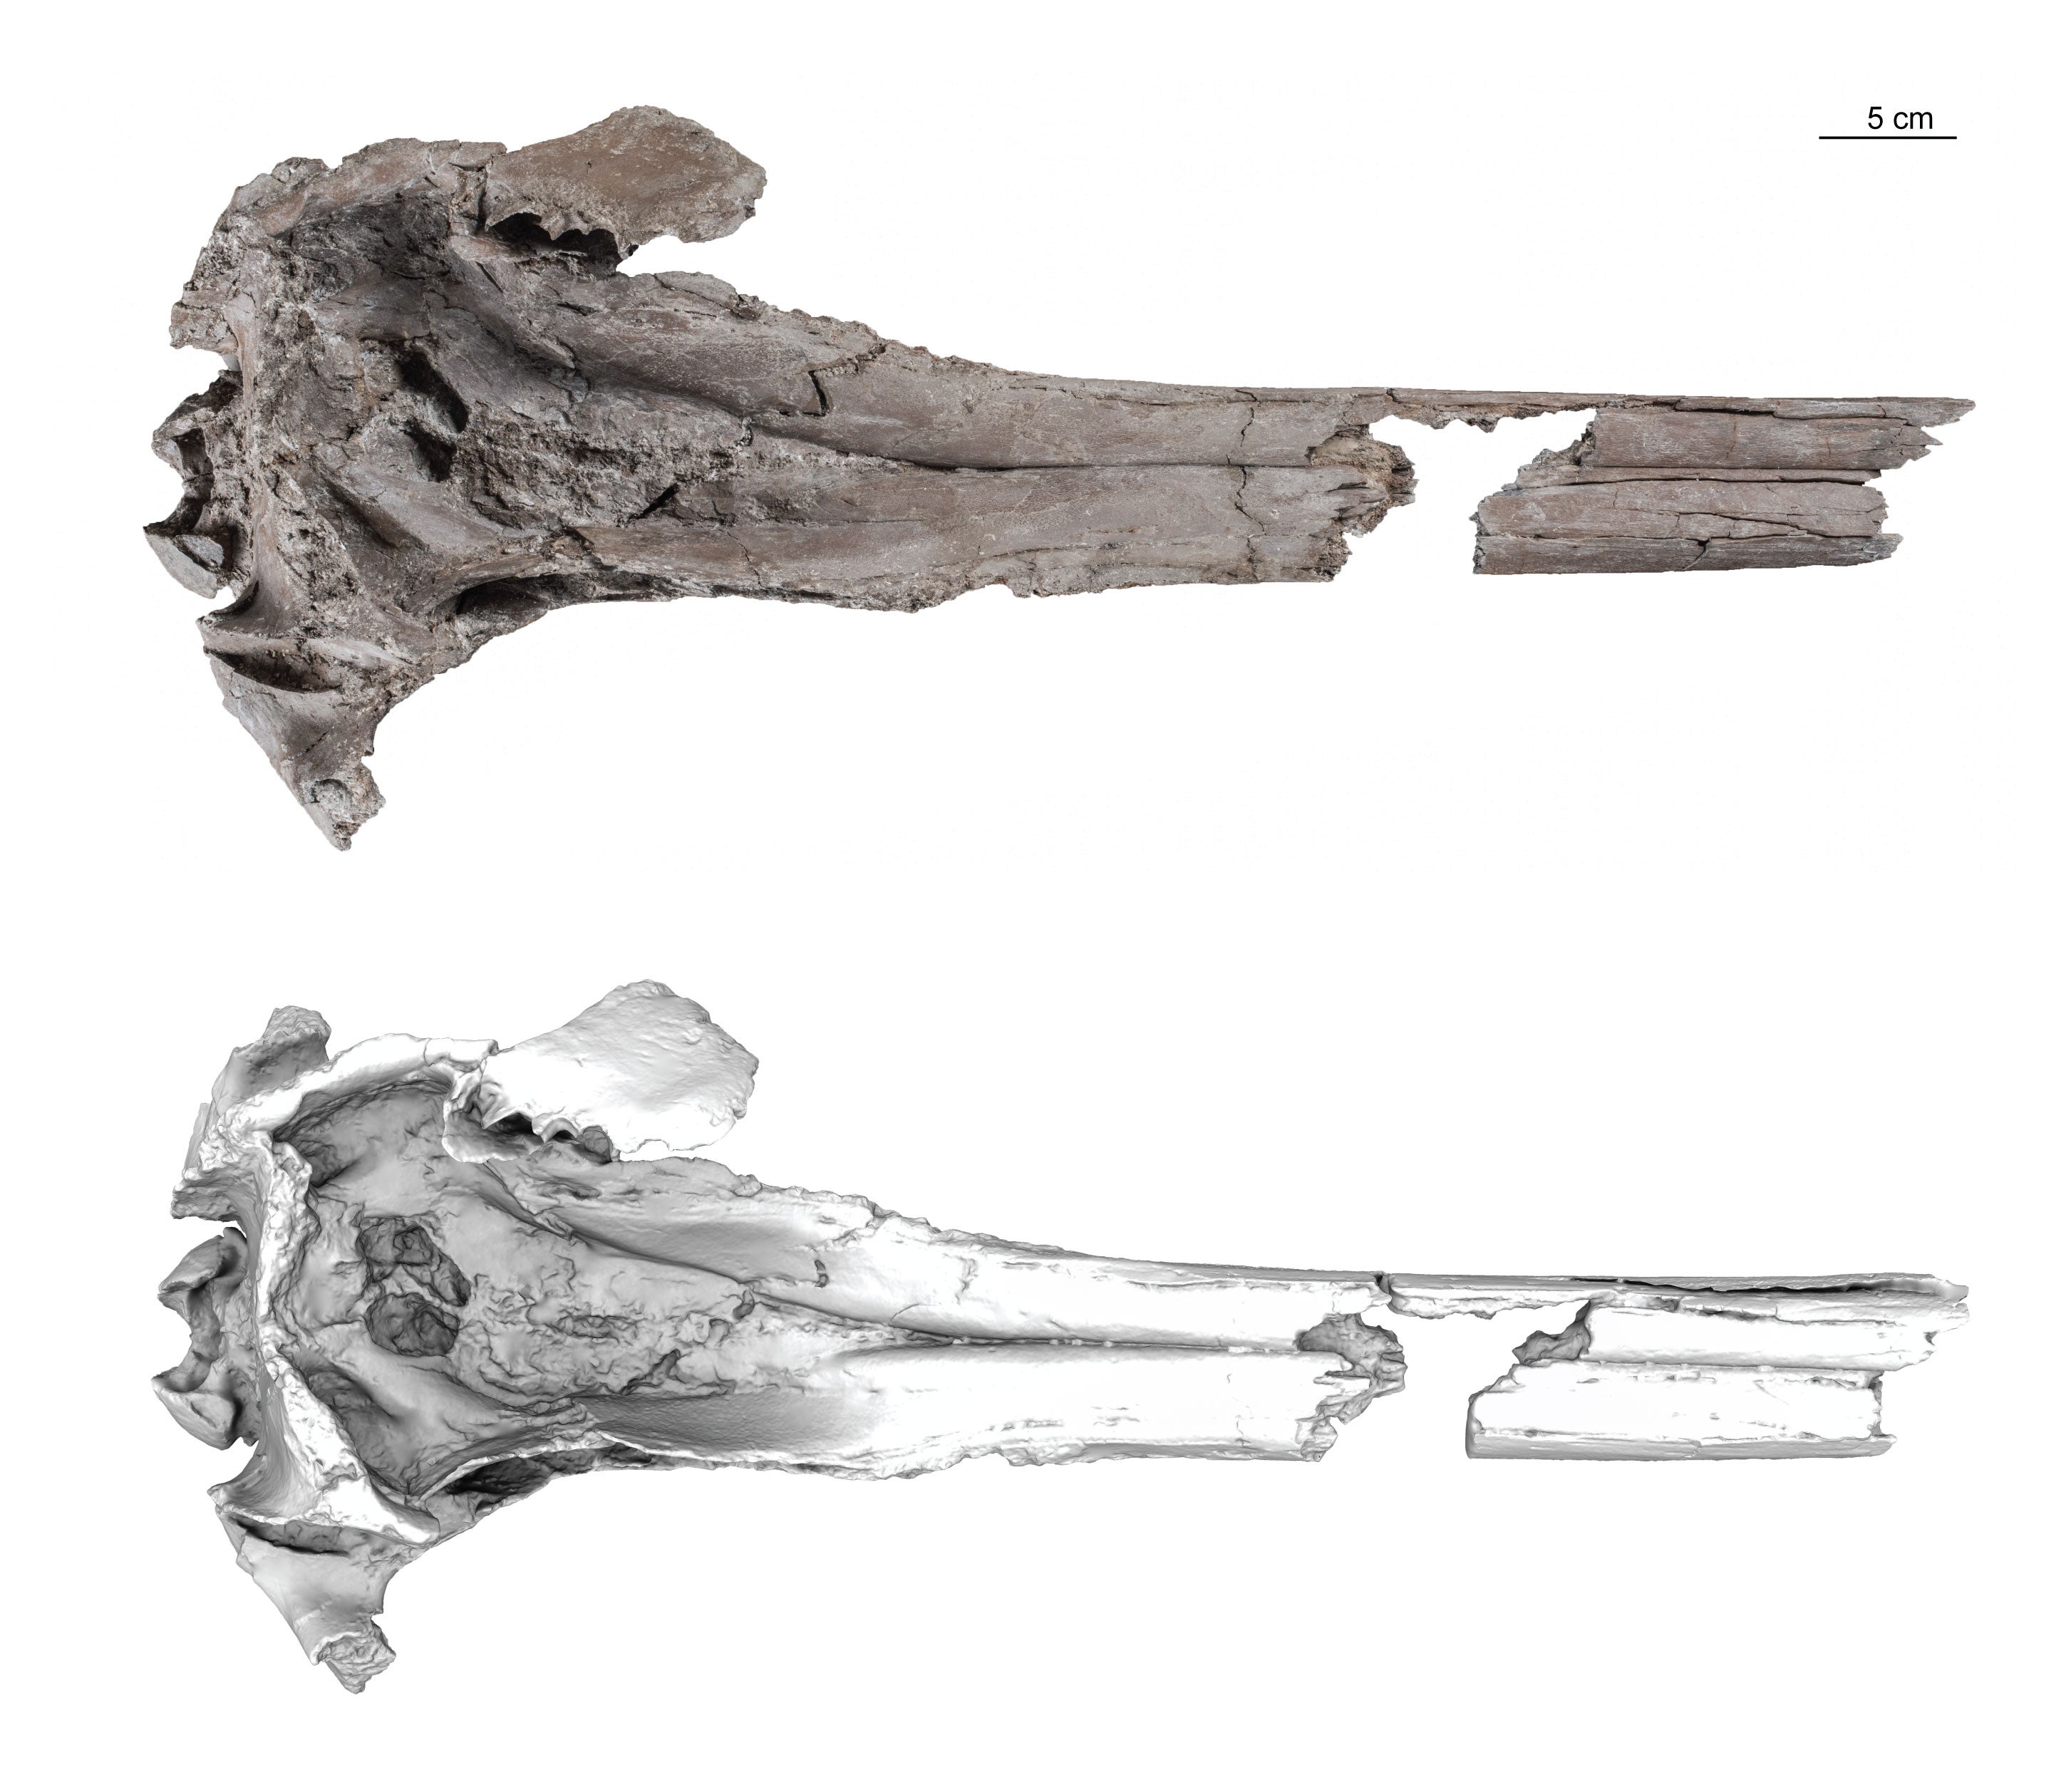 The specimen of the dolphin found by researchers